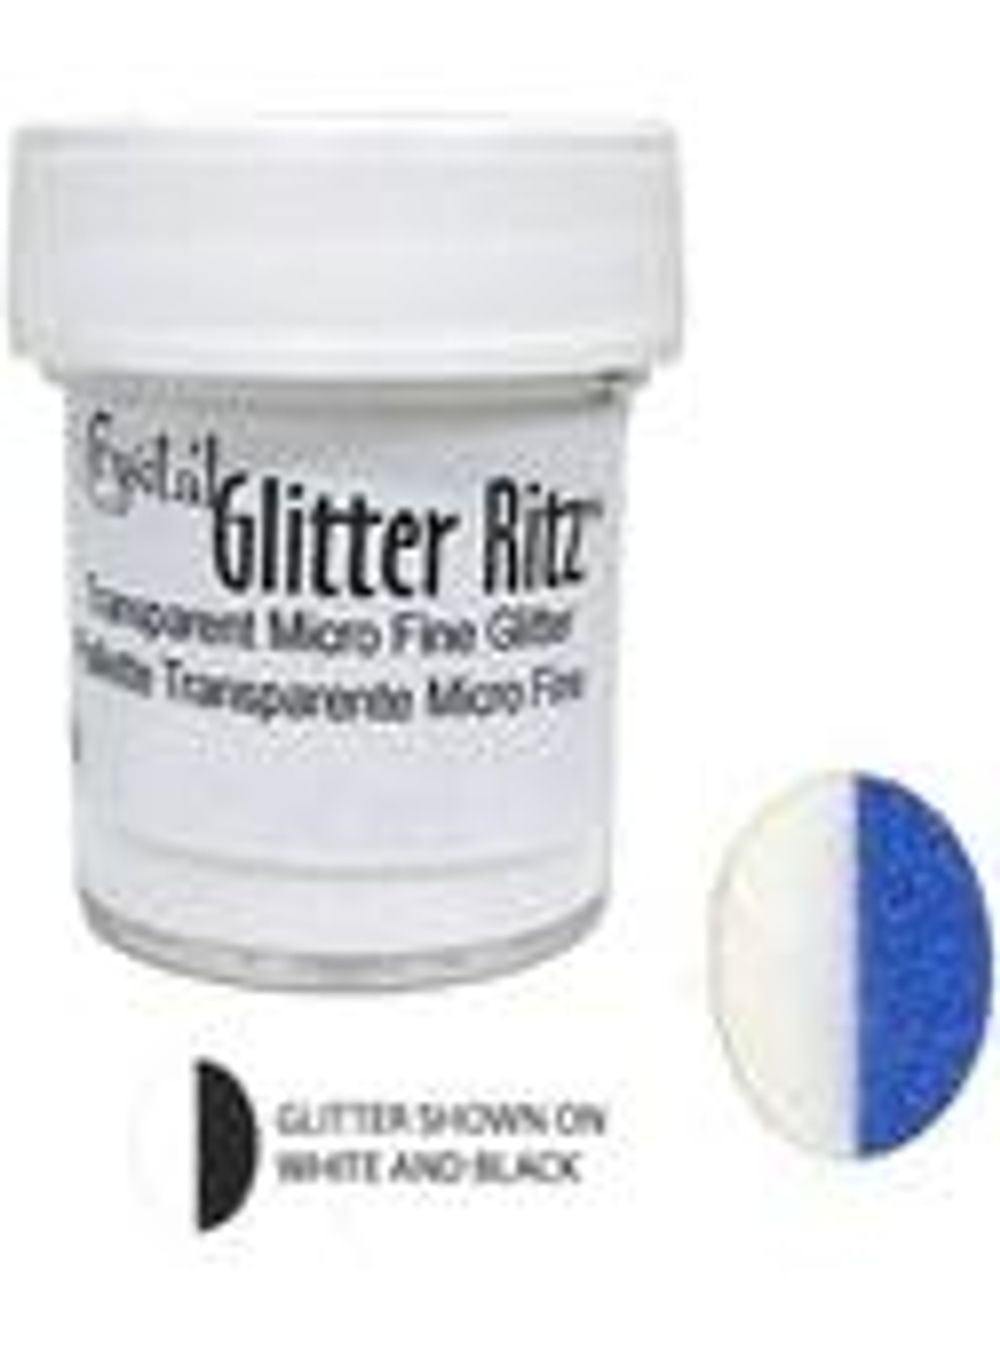 Sulyn Tinsel Glitter for Crafts, Purple and Blue, 2.5 oz